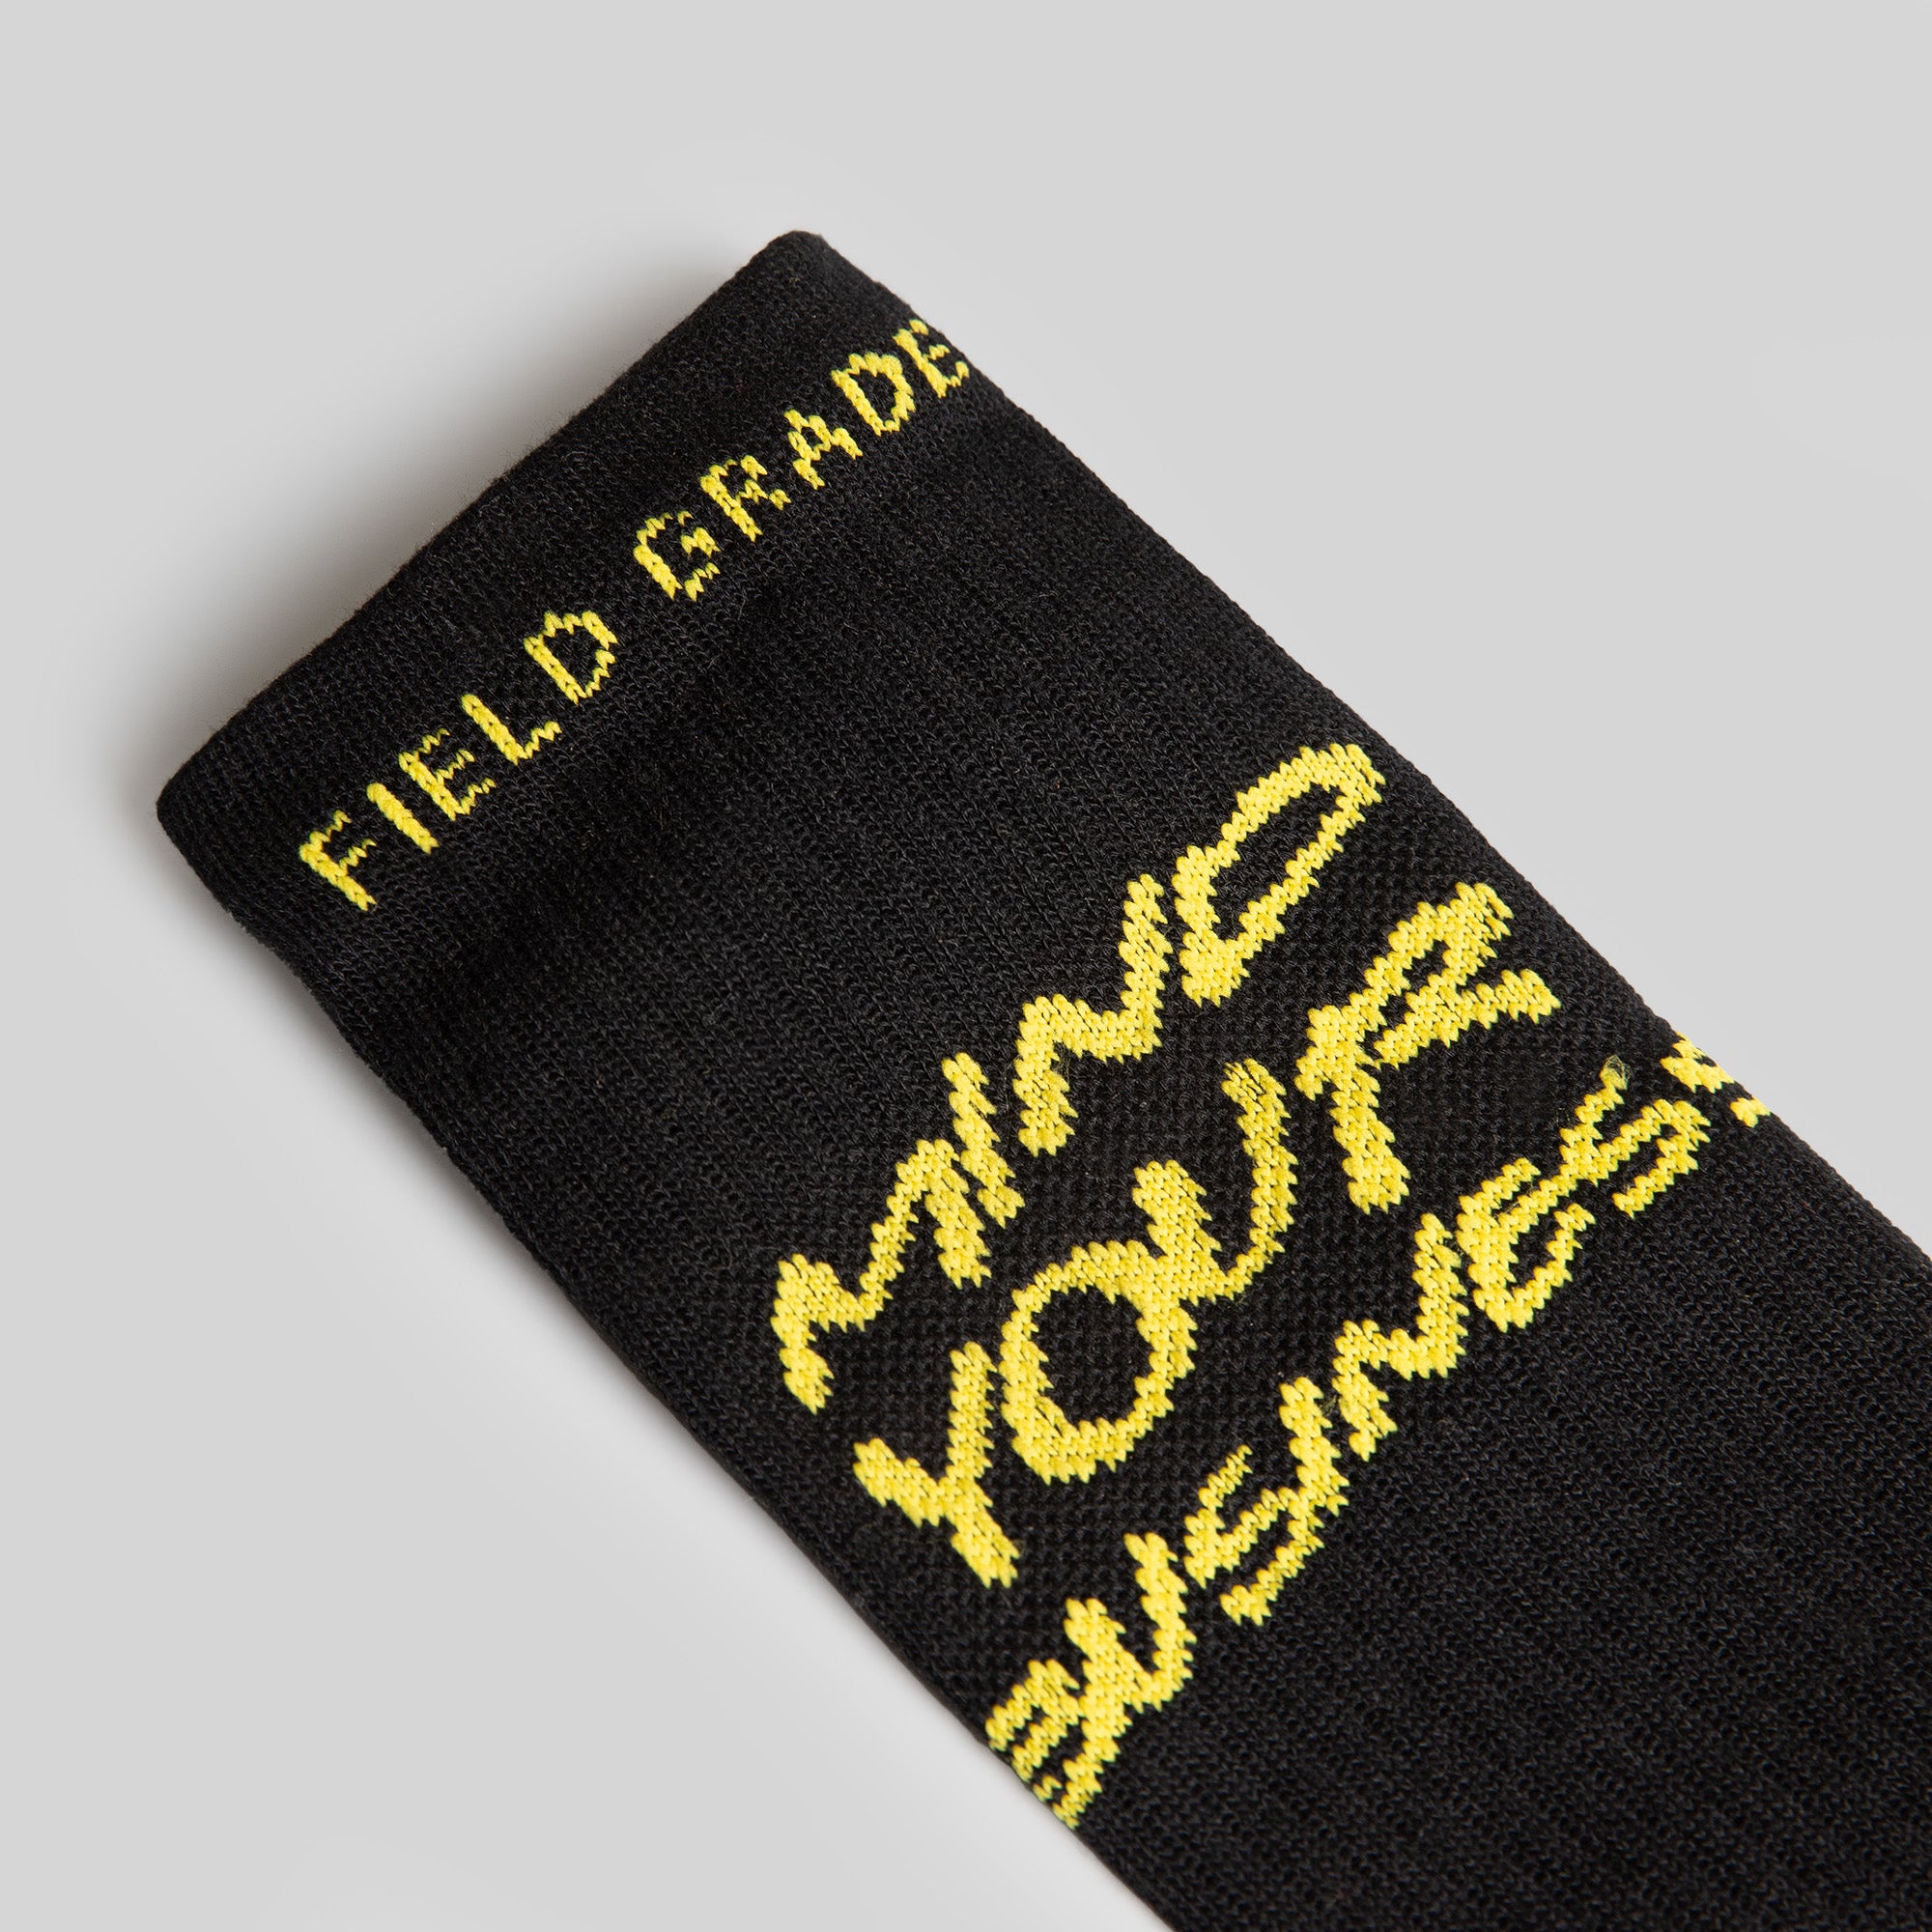 MIND YOUR BUSINESS BLACK/YELLOW CUSHIONED CREW SOCK 3 PACK